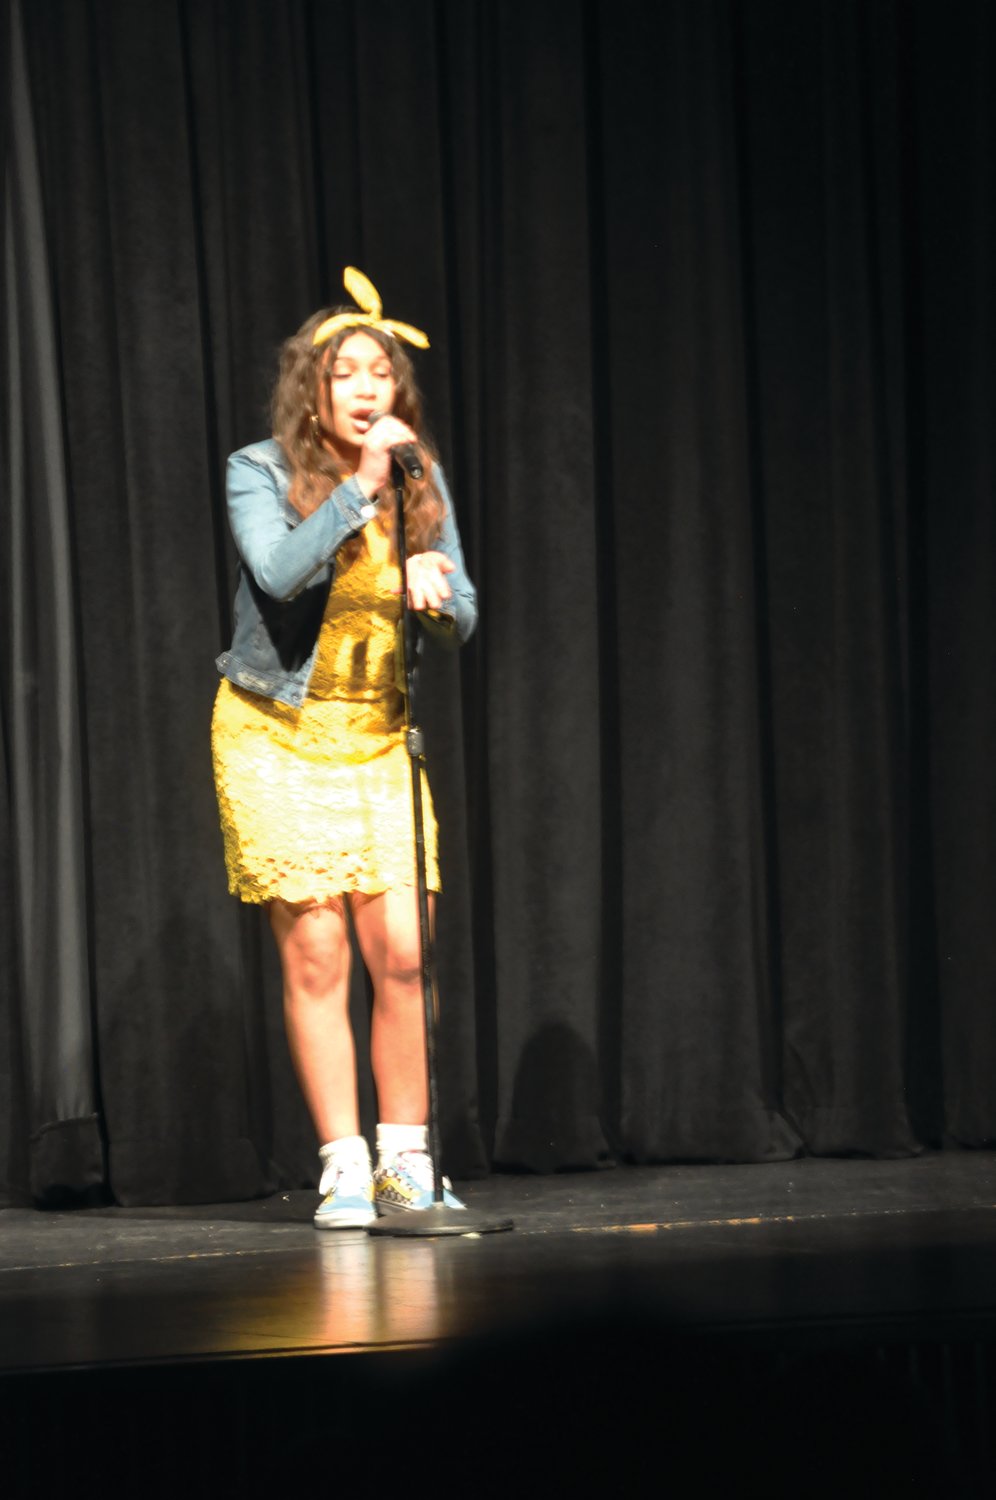 Angelina Leon-Leyva sings "Blinding Lights" Saturday in the MoCo's Got Talent for Scholarships competition at Crawfordsville High School. Leon-Leyva won second place in the competition, a fundraiser for the alumni association. Donations can be mailed to CHS Alumni Association, One Athenian Drive, Crawfordsville.